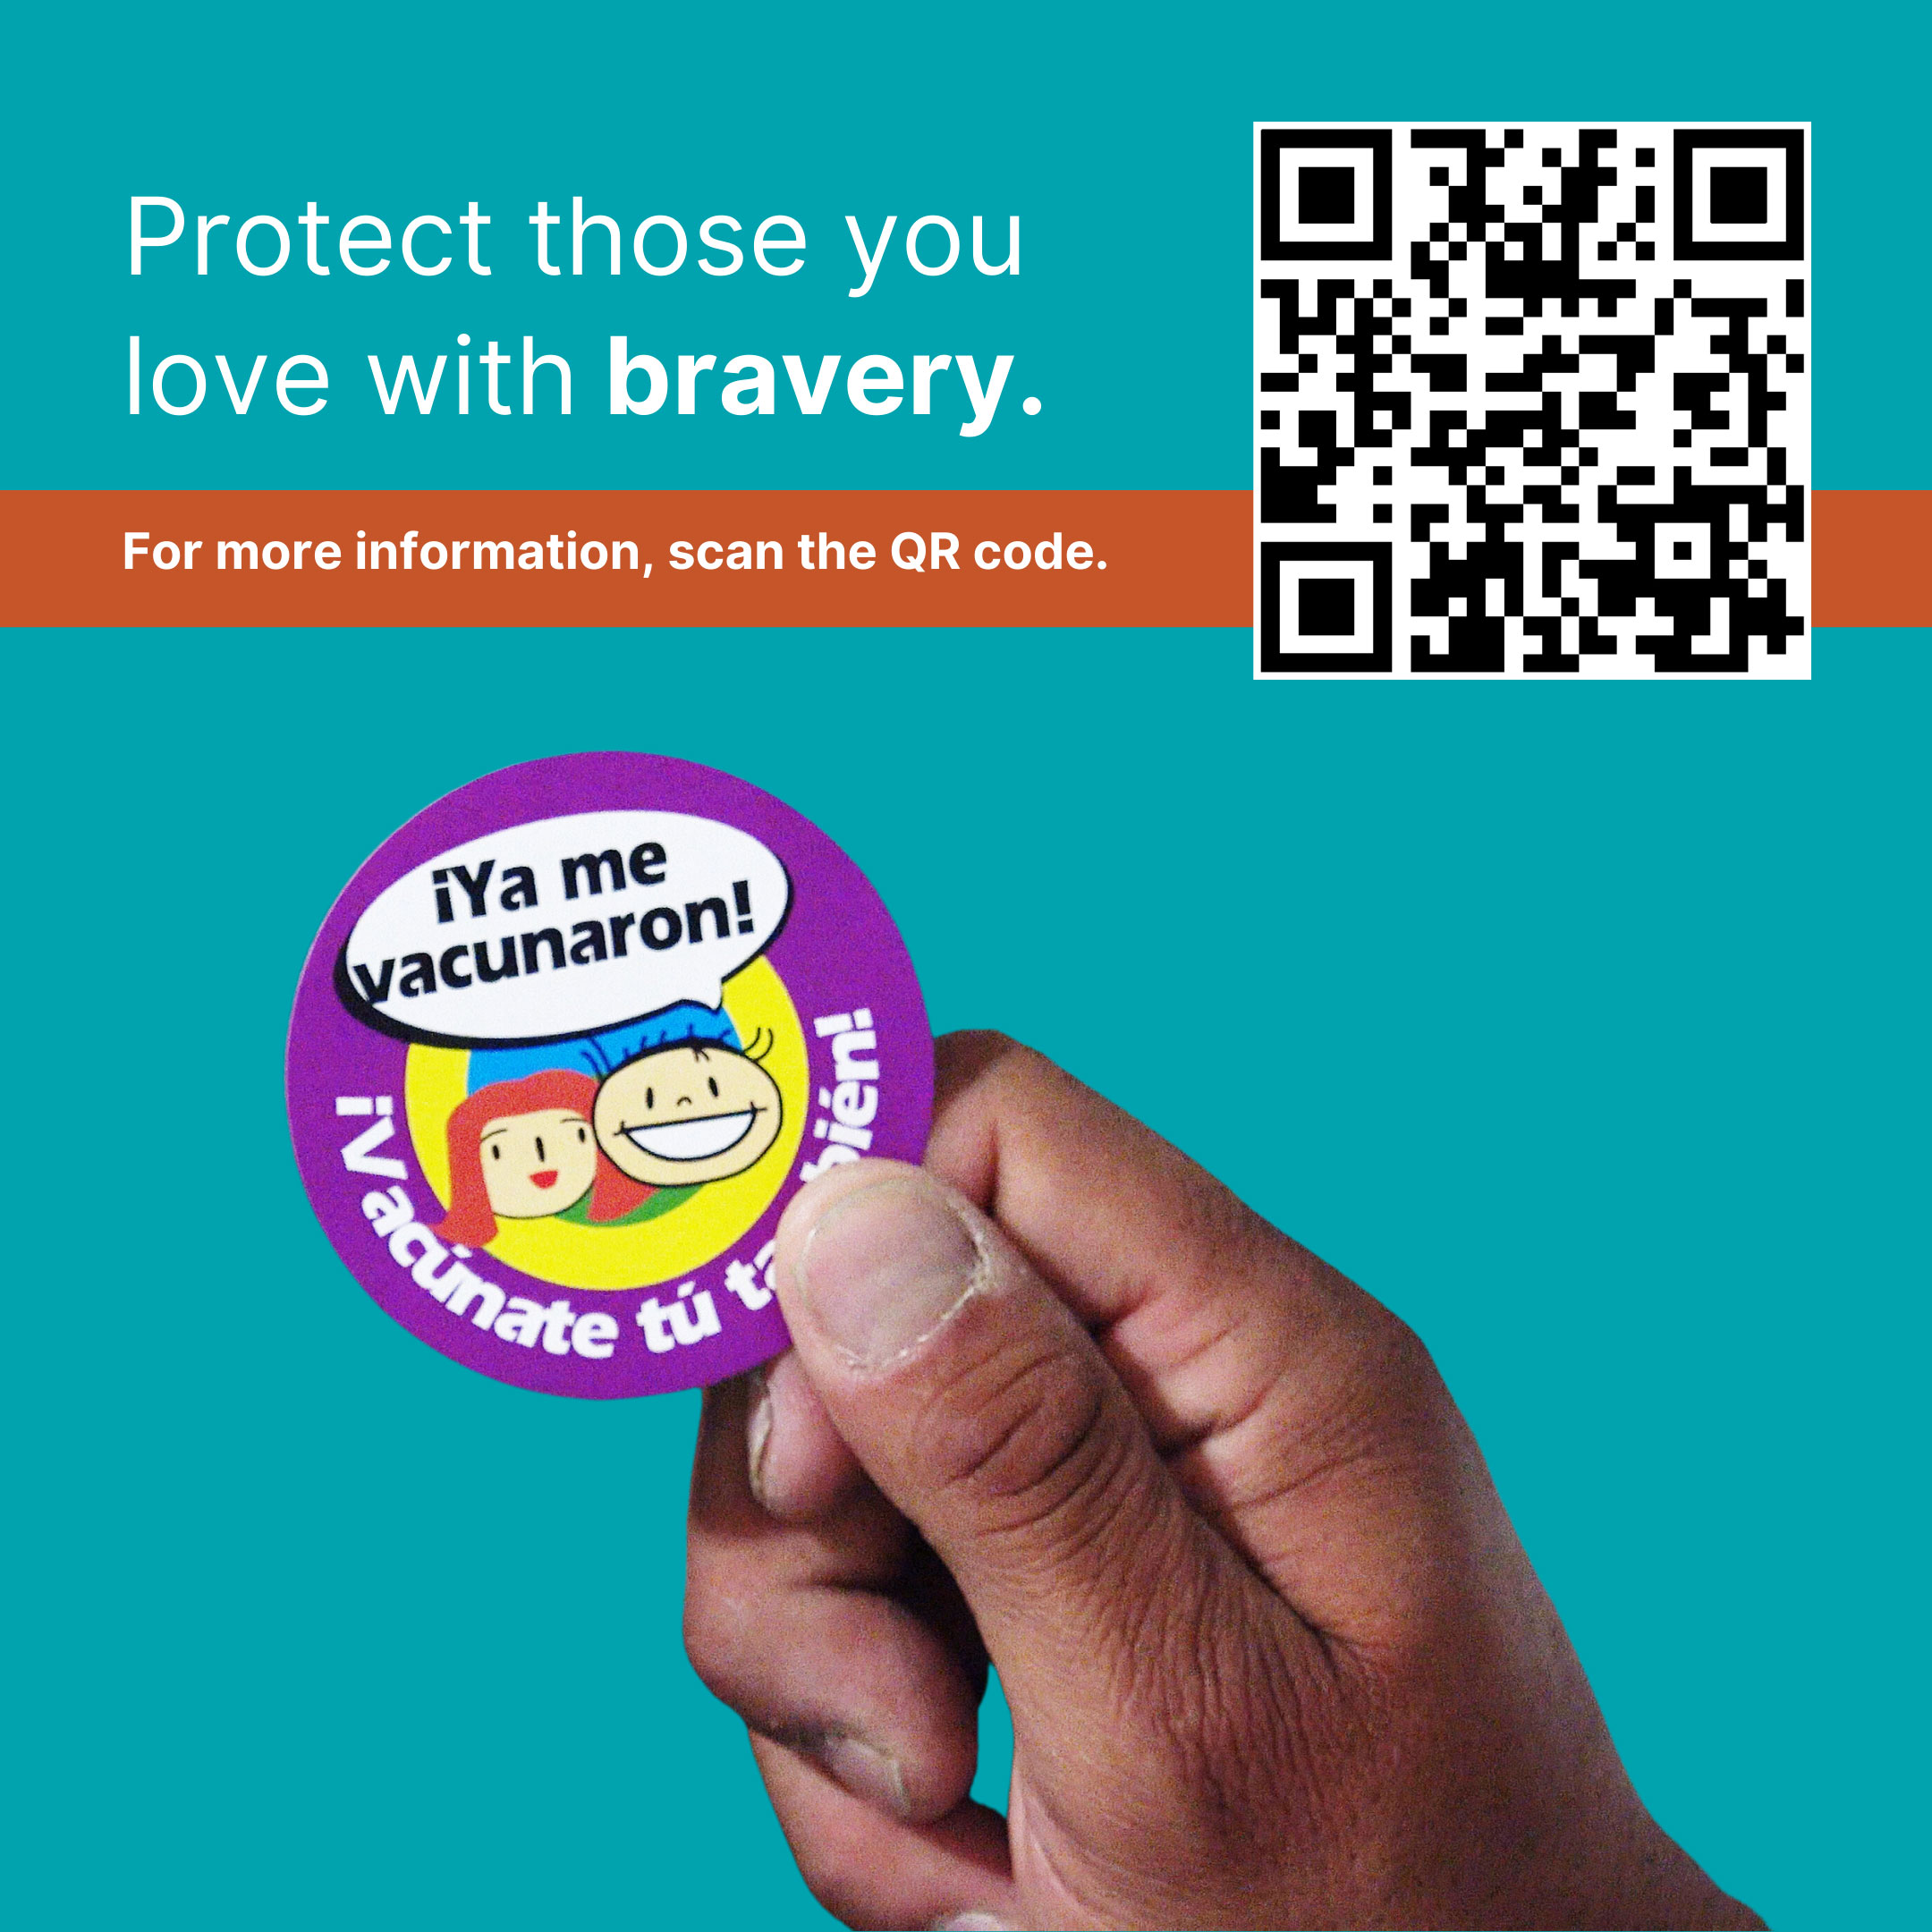 Hand holding a sticker that reads “I’ve got vaccinated! Get you vaccinated too!” Text says: Protect those you love with bravery.